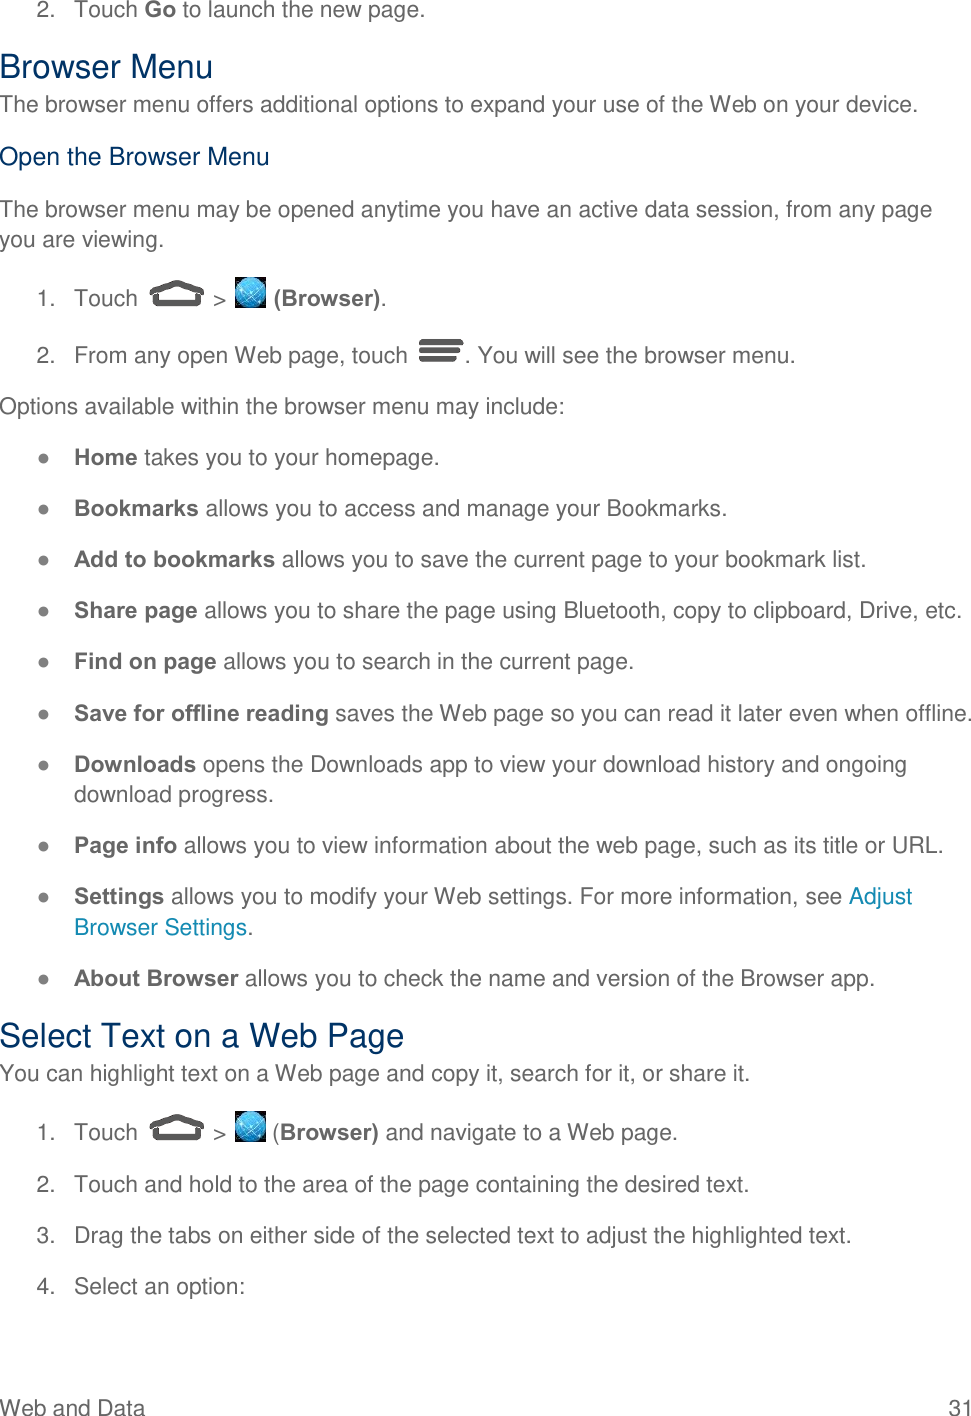  Web and Data  31 2.  Touch Go to launch the new page. Browser Menu The browser menu offers additional options to expand your use of the Web on your device. Open the Browser Menu The browser menu may be opened anytime you have an active data session, from any page you are viewing.  1.  Touch   &gt;   (Browser). 2.  From any open Web page, touch  . You will see the browser menu. Options available within the browser menu may include: ● Home takes you to your homepage. ● Bookmarks allows you to access and manage your Bookmarks. ● Add to bookmarks allows you to save the current page to your bookmark list. ● Share page allows you to share the page using Bluetooth, copy to clipboard, Drive, etc. ● Find on page allows you to search in the current page.  ● Save for offline reading saves the Web page so you can read it later even when offline.  ● Downloads opens the Downloads app to view your download history and ongoing download progress. ● Page info allows you to view information about the web page, such as its title or URL.  ● Settings allows you to modify your Web settings. For more information, see Adjust Browser Settings.  ● About Browser allows you to check the name and version of the Browser app. Select Text on a Web Page You can highlight text on a Web page and copy it, search for it, or share it. 1.  Touch   &gt;   (Browser) and navigate to a Web page. 2.  Touch and hold to the area of the page containing the desired text. 3.  Drag the tabs on either side of the selected text to adjust the highlighted text. 4.  Select an option: 